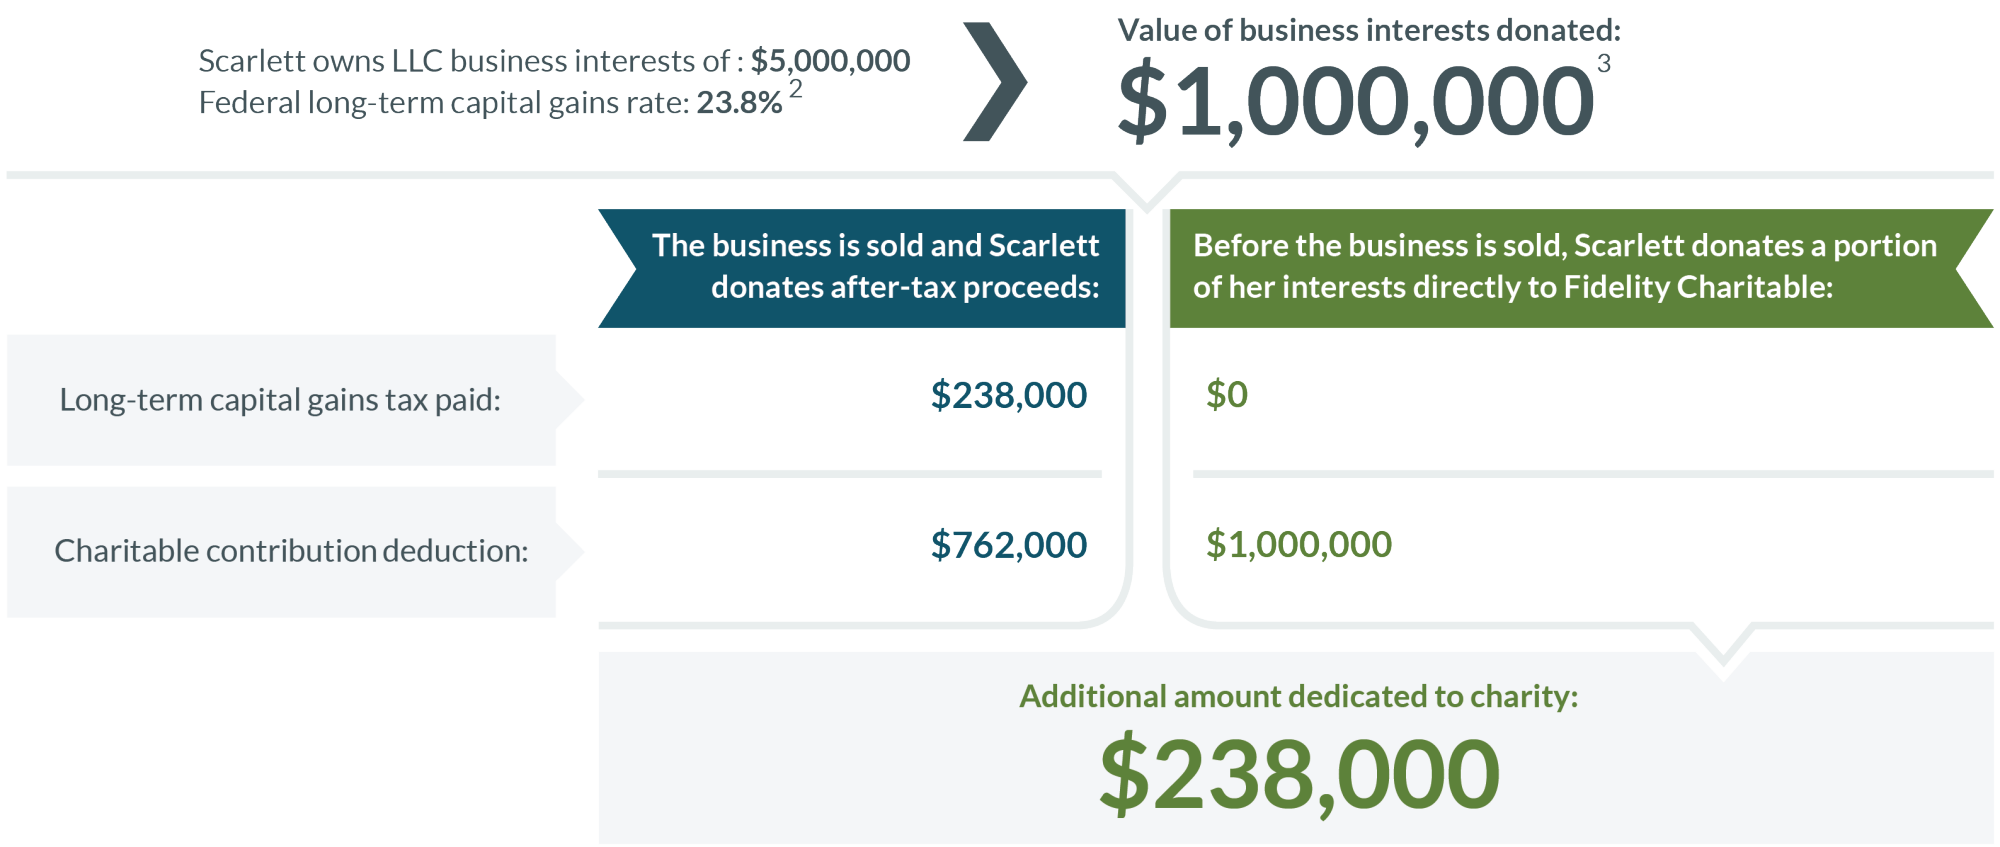 A comparison of donating a portion of business interests directly to charity versus donating the after-tax proceeds.